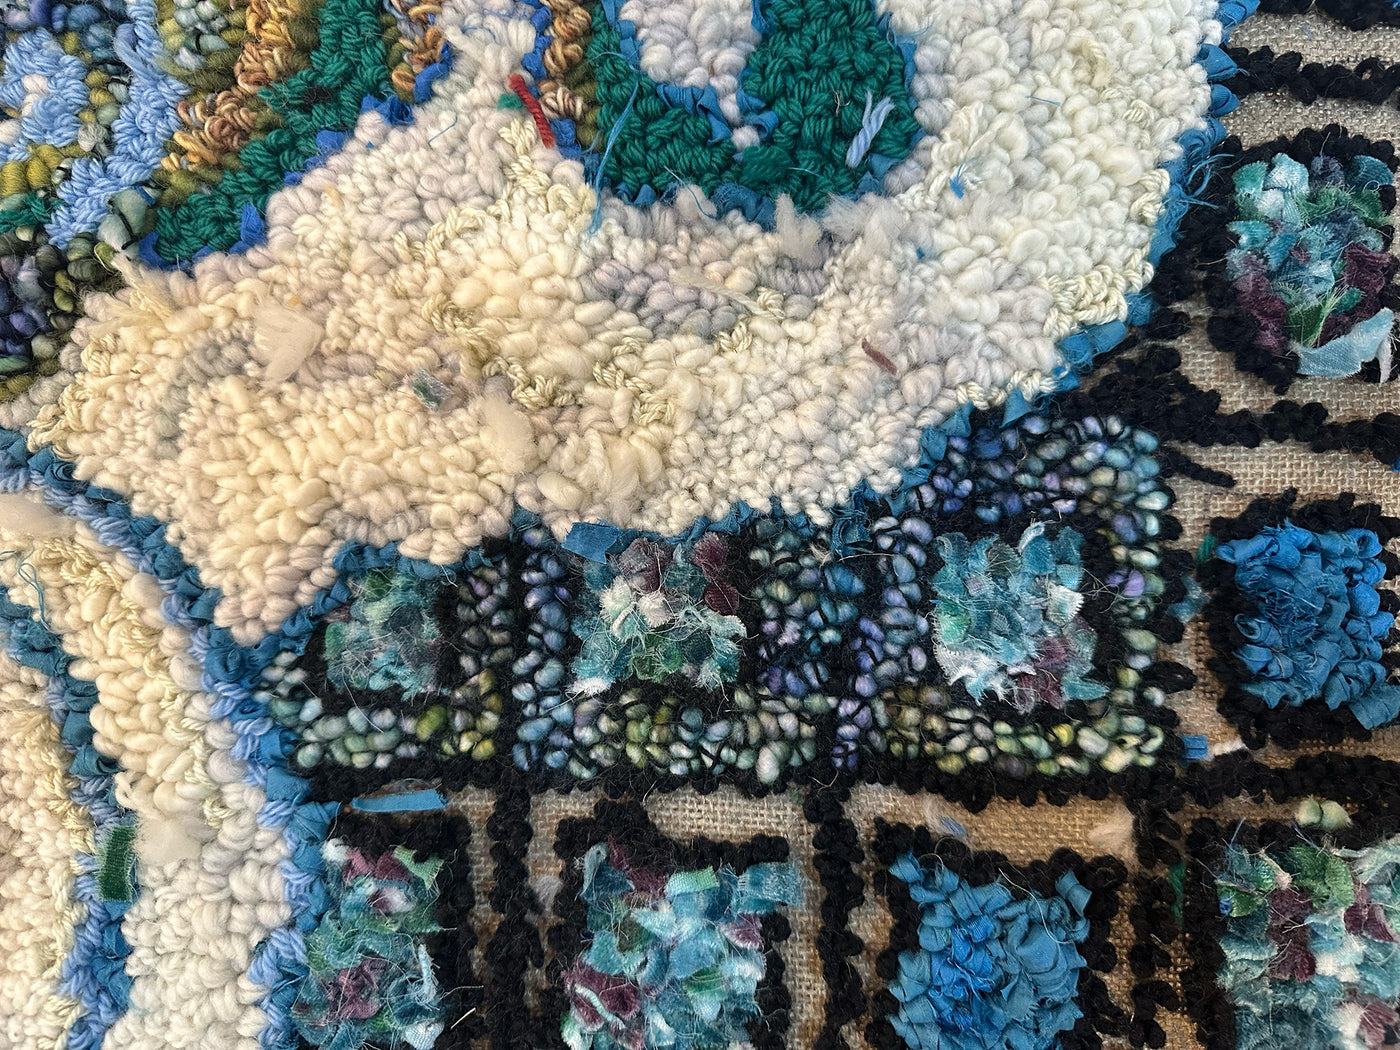 Finishing touches on your hooked rug, Thursday Live: Episode 179